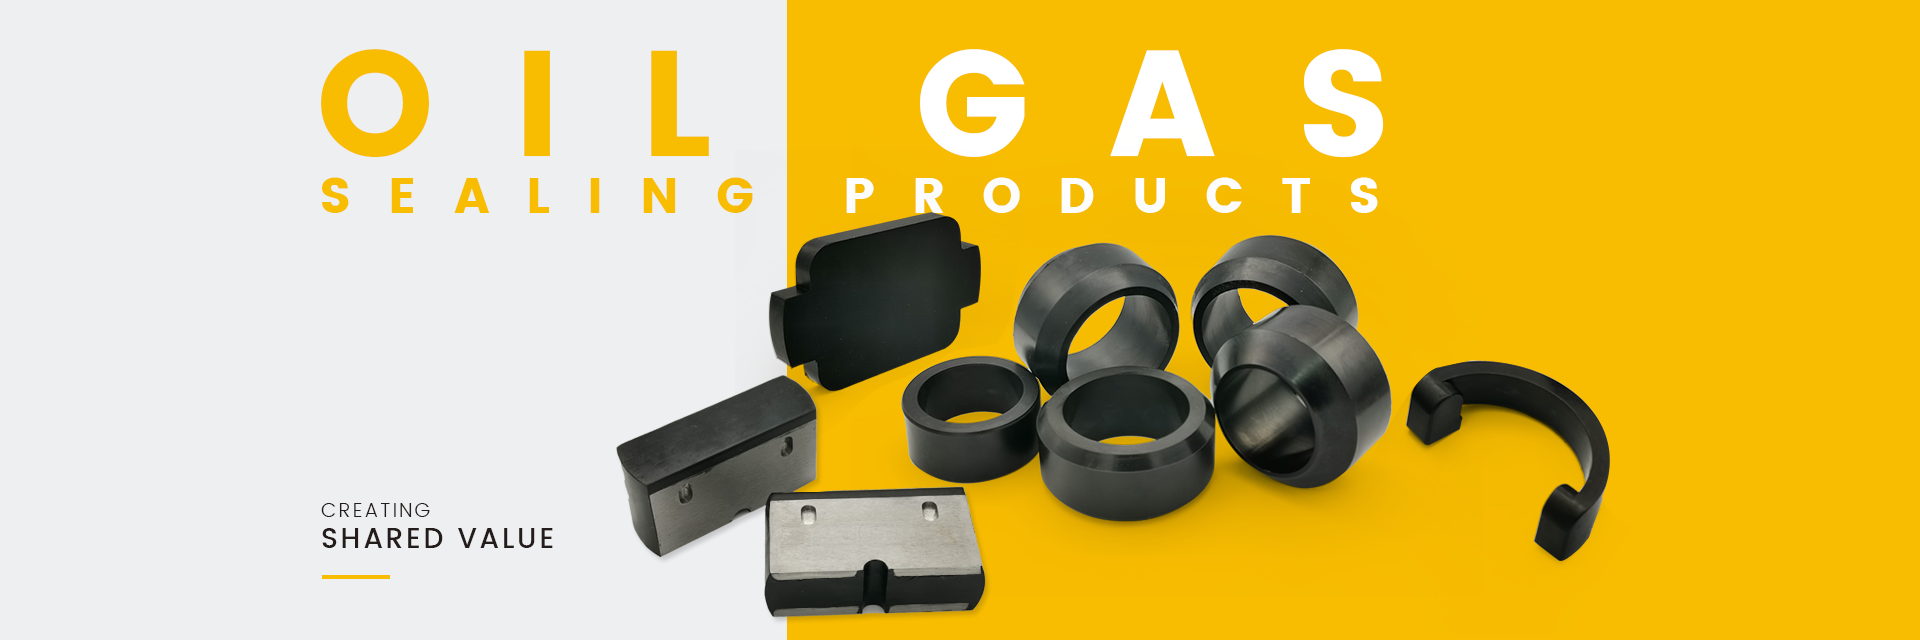 Oil seals, Oil Gas products